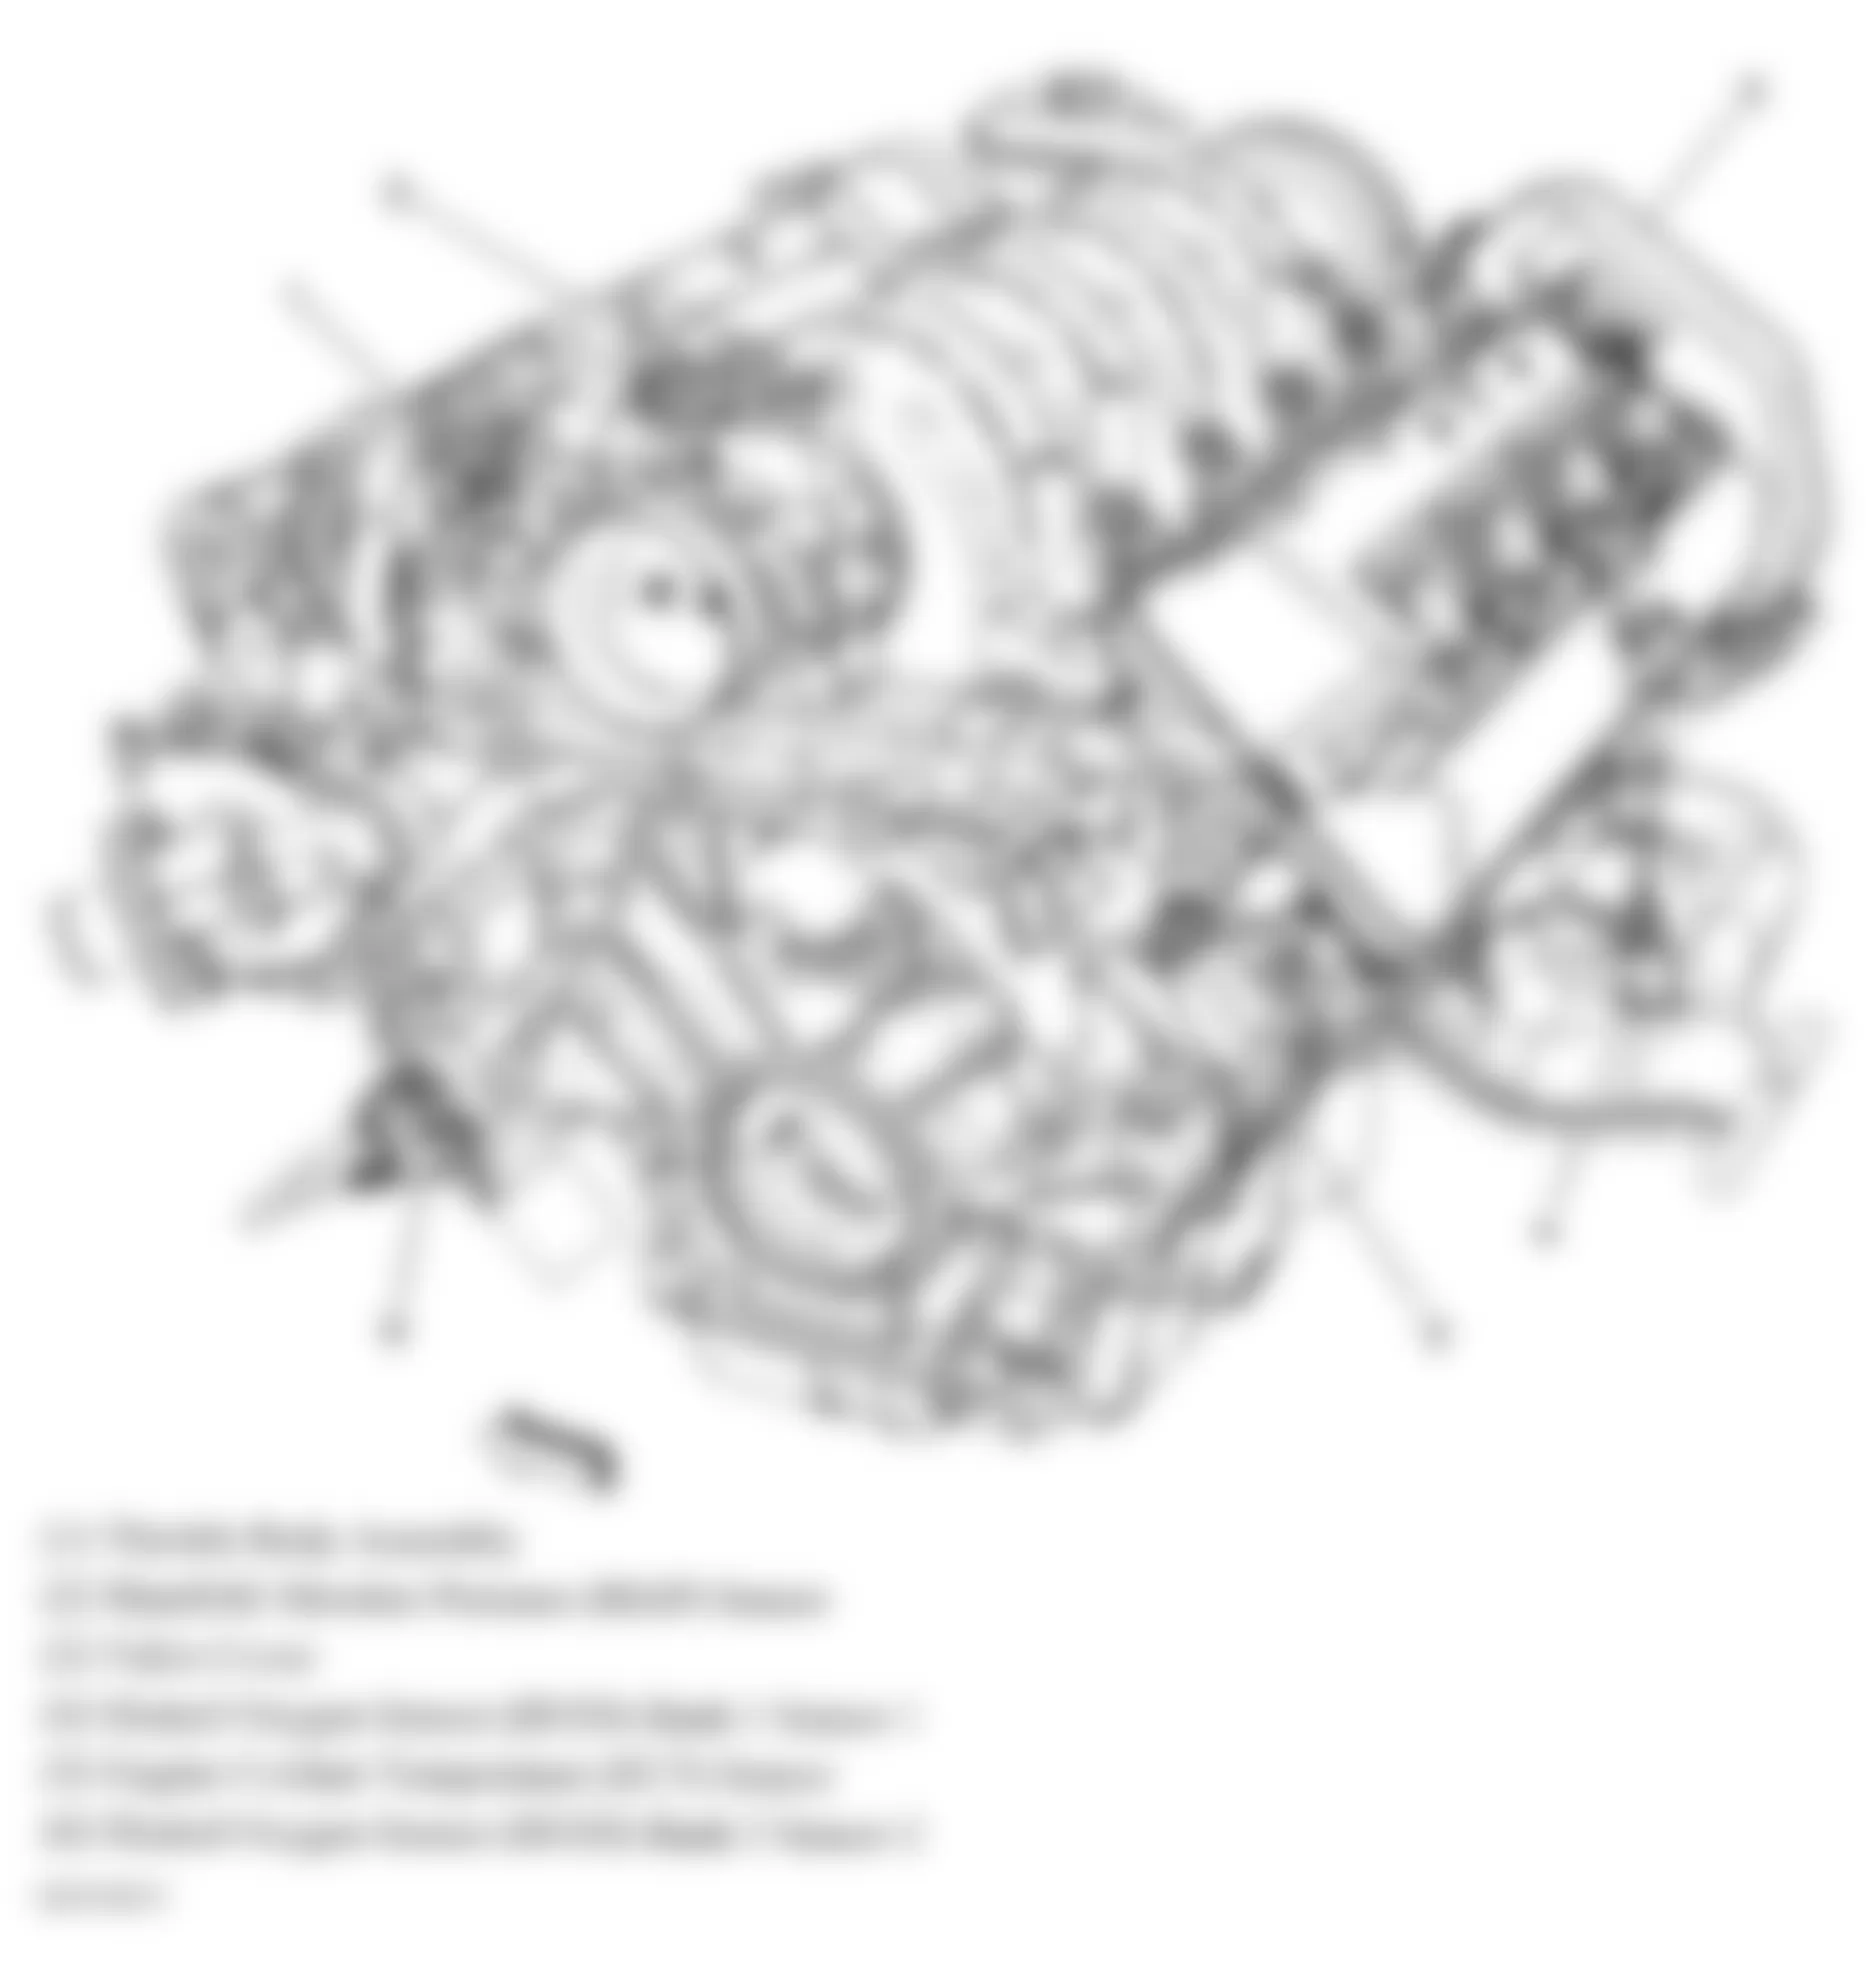 Buick Lucerne CXL 2008 - Component Locations -  Rear Of Engine (4.6L)